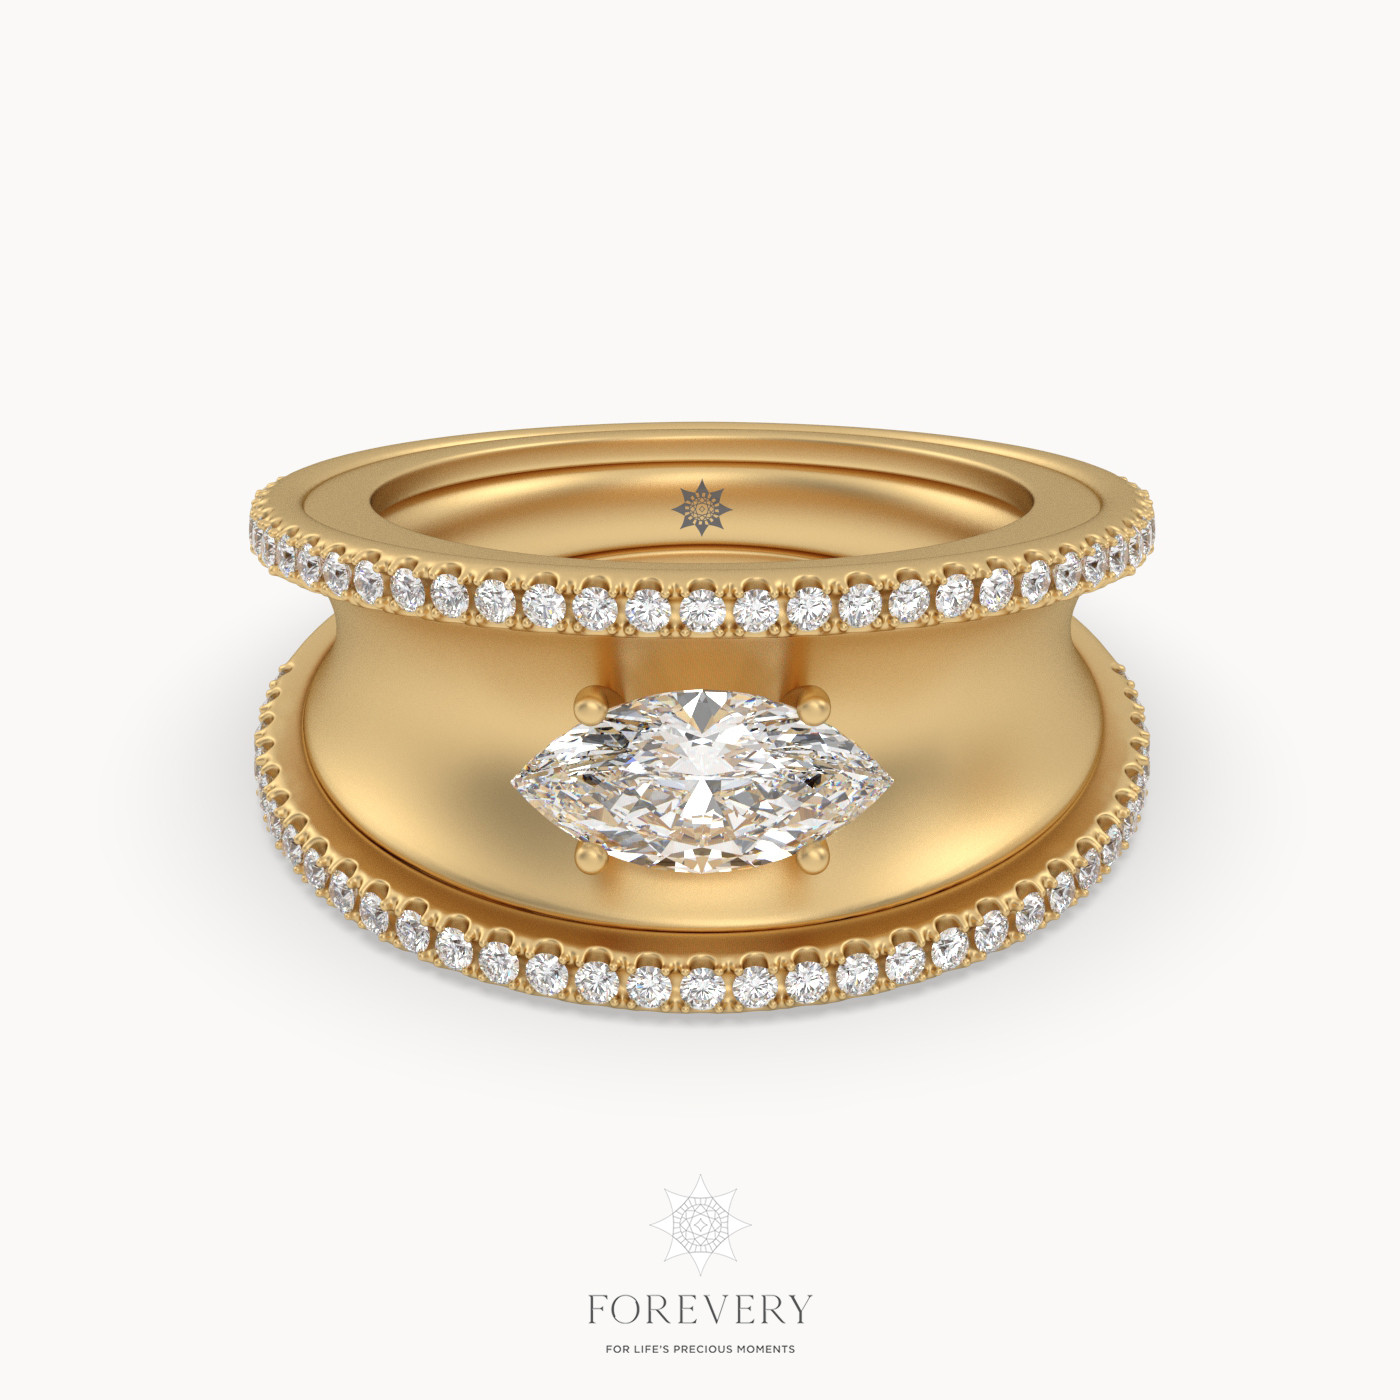 18K YELLOW GOLD Marquise Diamond Center with Double Row of Diamonds